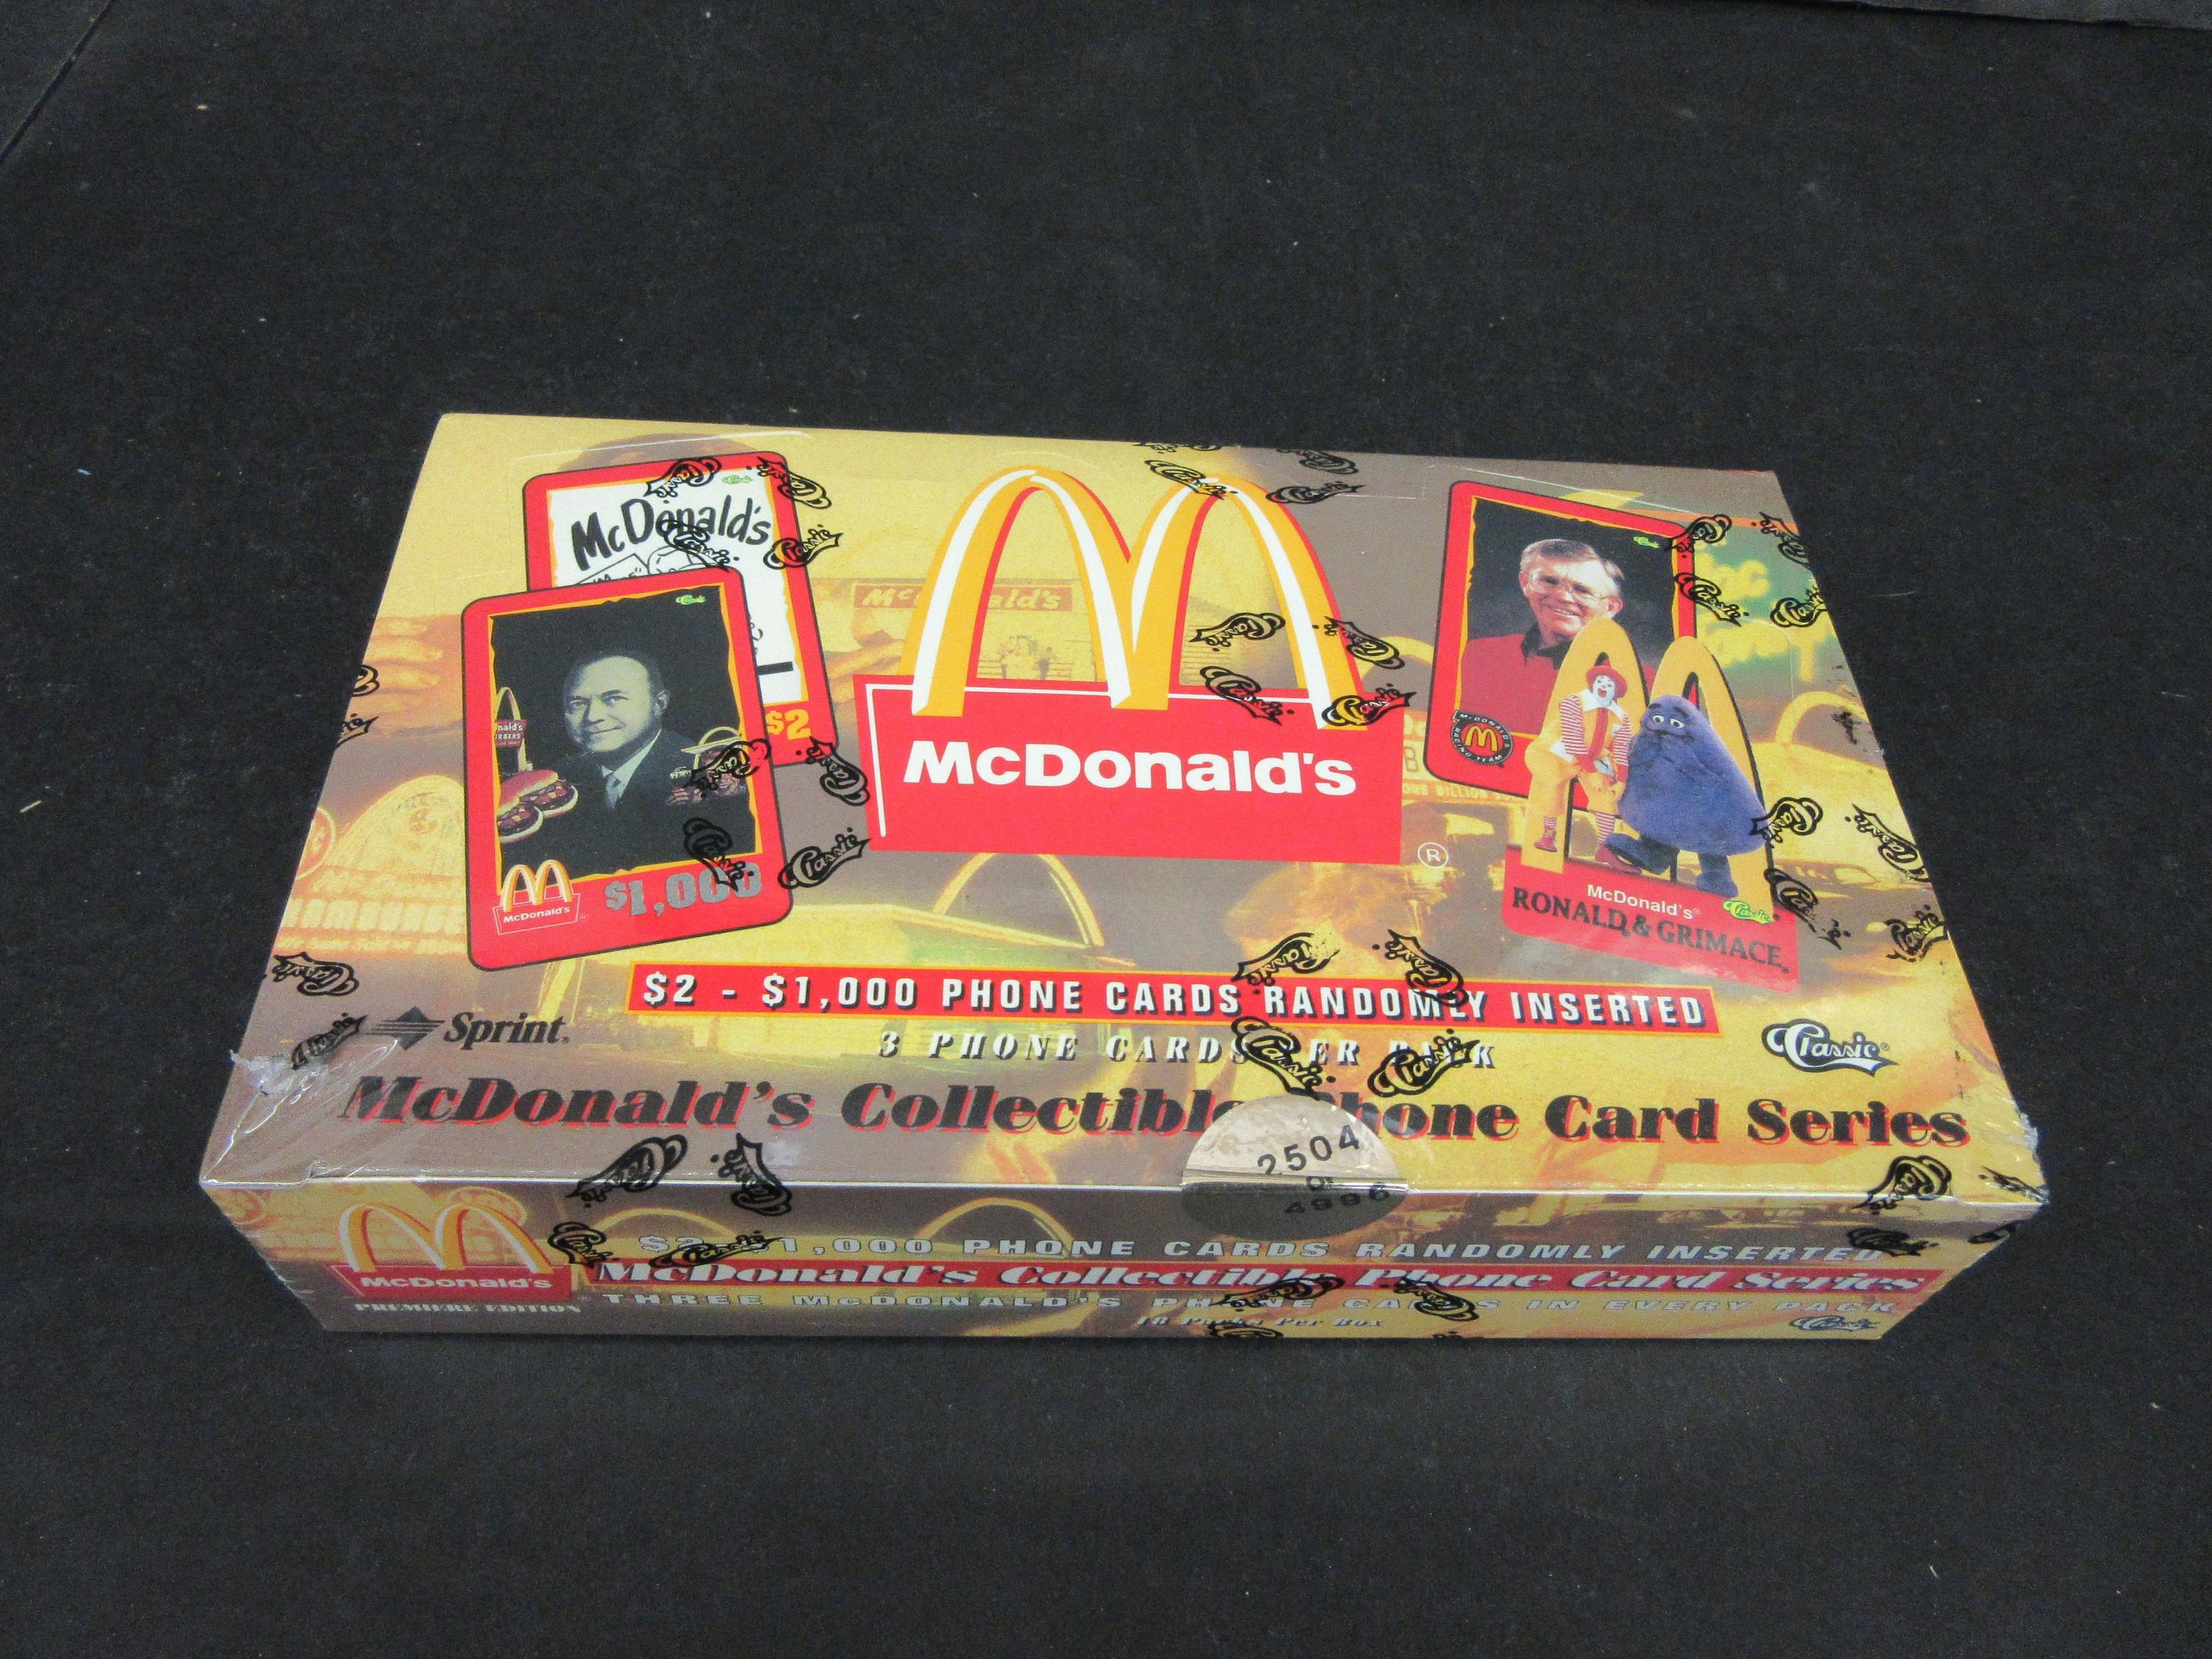 1996 Classic McDonald's Collectible Phone Series Cards Box